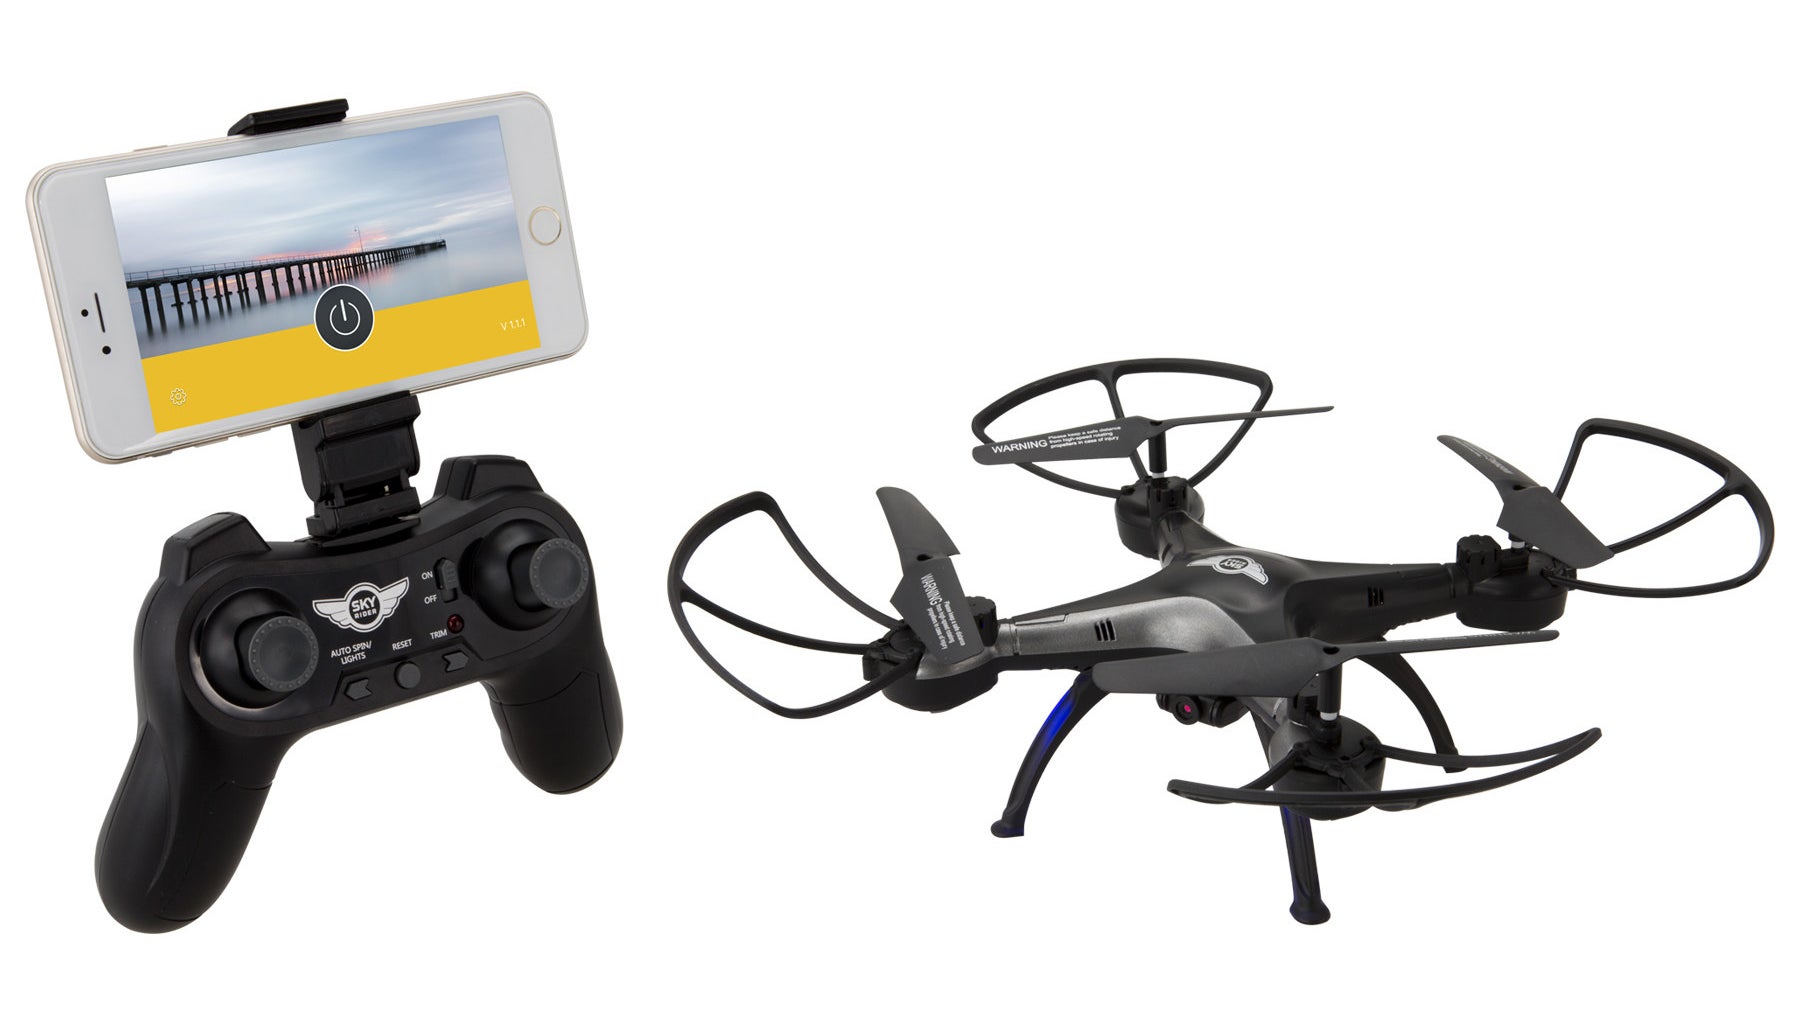 a controller and iphone on the left and the quadcoptor drone on the right